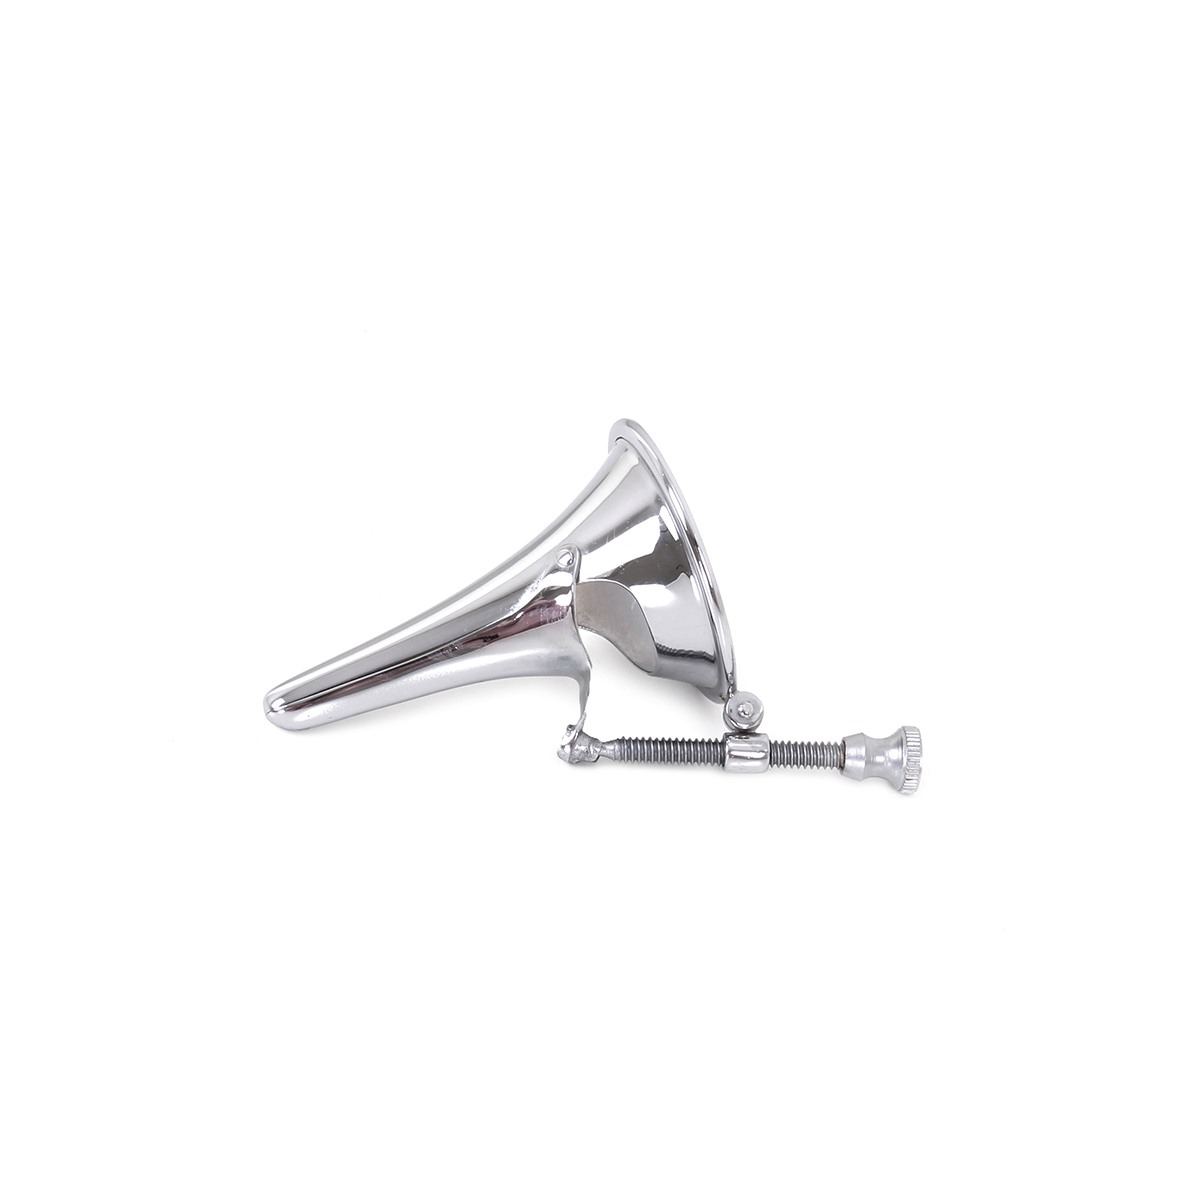 Collin-Small-Anal-Speculum-OPR-2960090-1